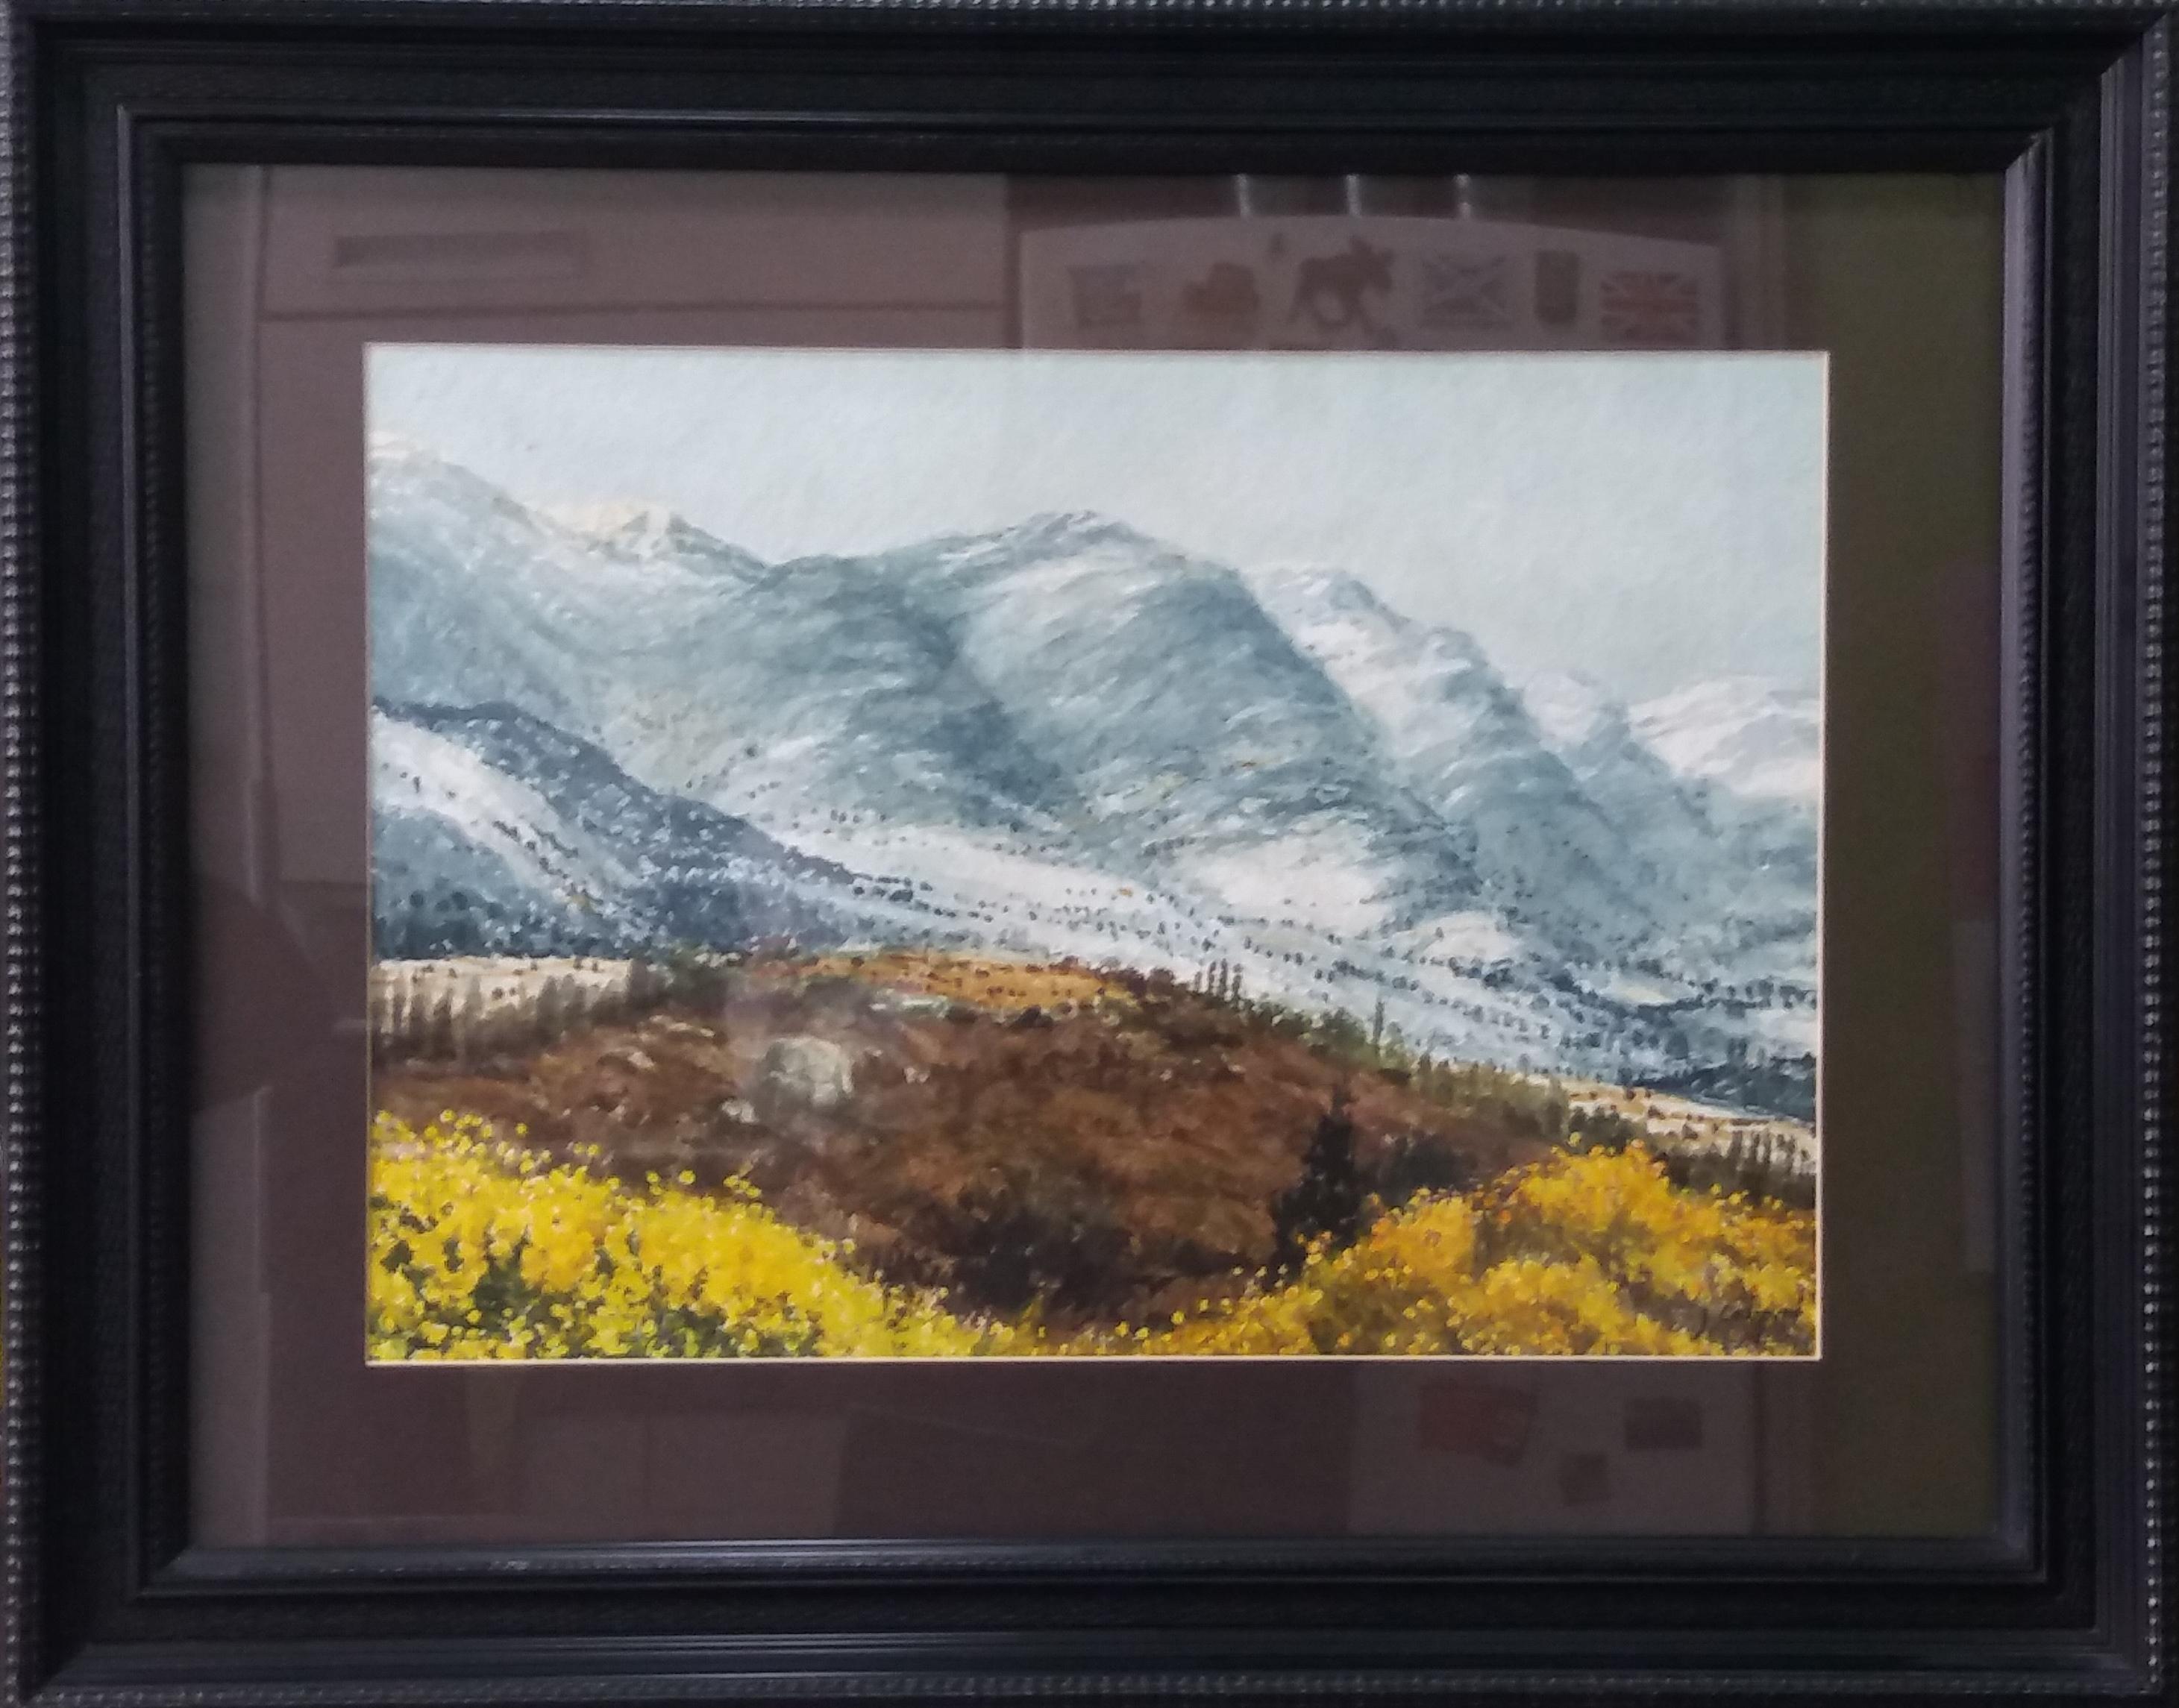  lake in the pPyrenees Landscape original watercolor painting
 frame
Original watercolor by the Spanish artist
Joaquin Cabane.
Painter and watercolorist, Joaquim Cabané traveled in search of inspiration different points of the Spanish and Italian